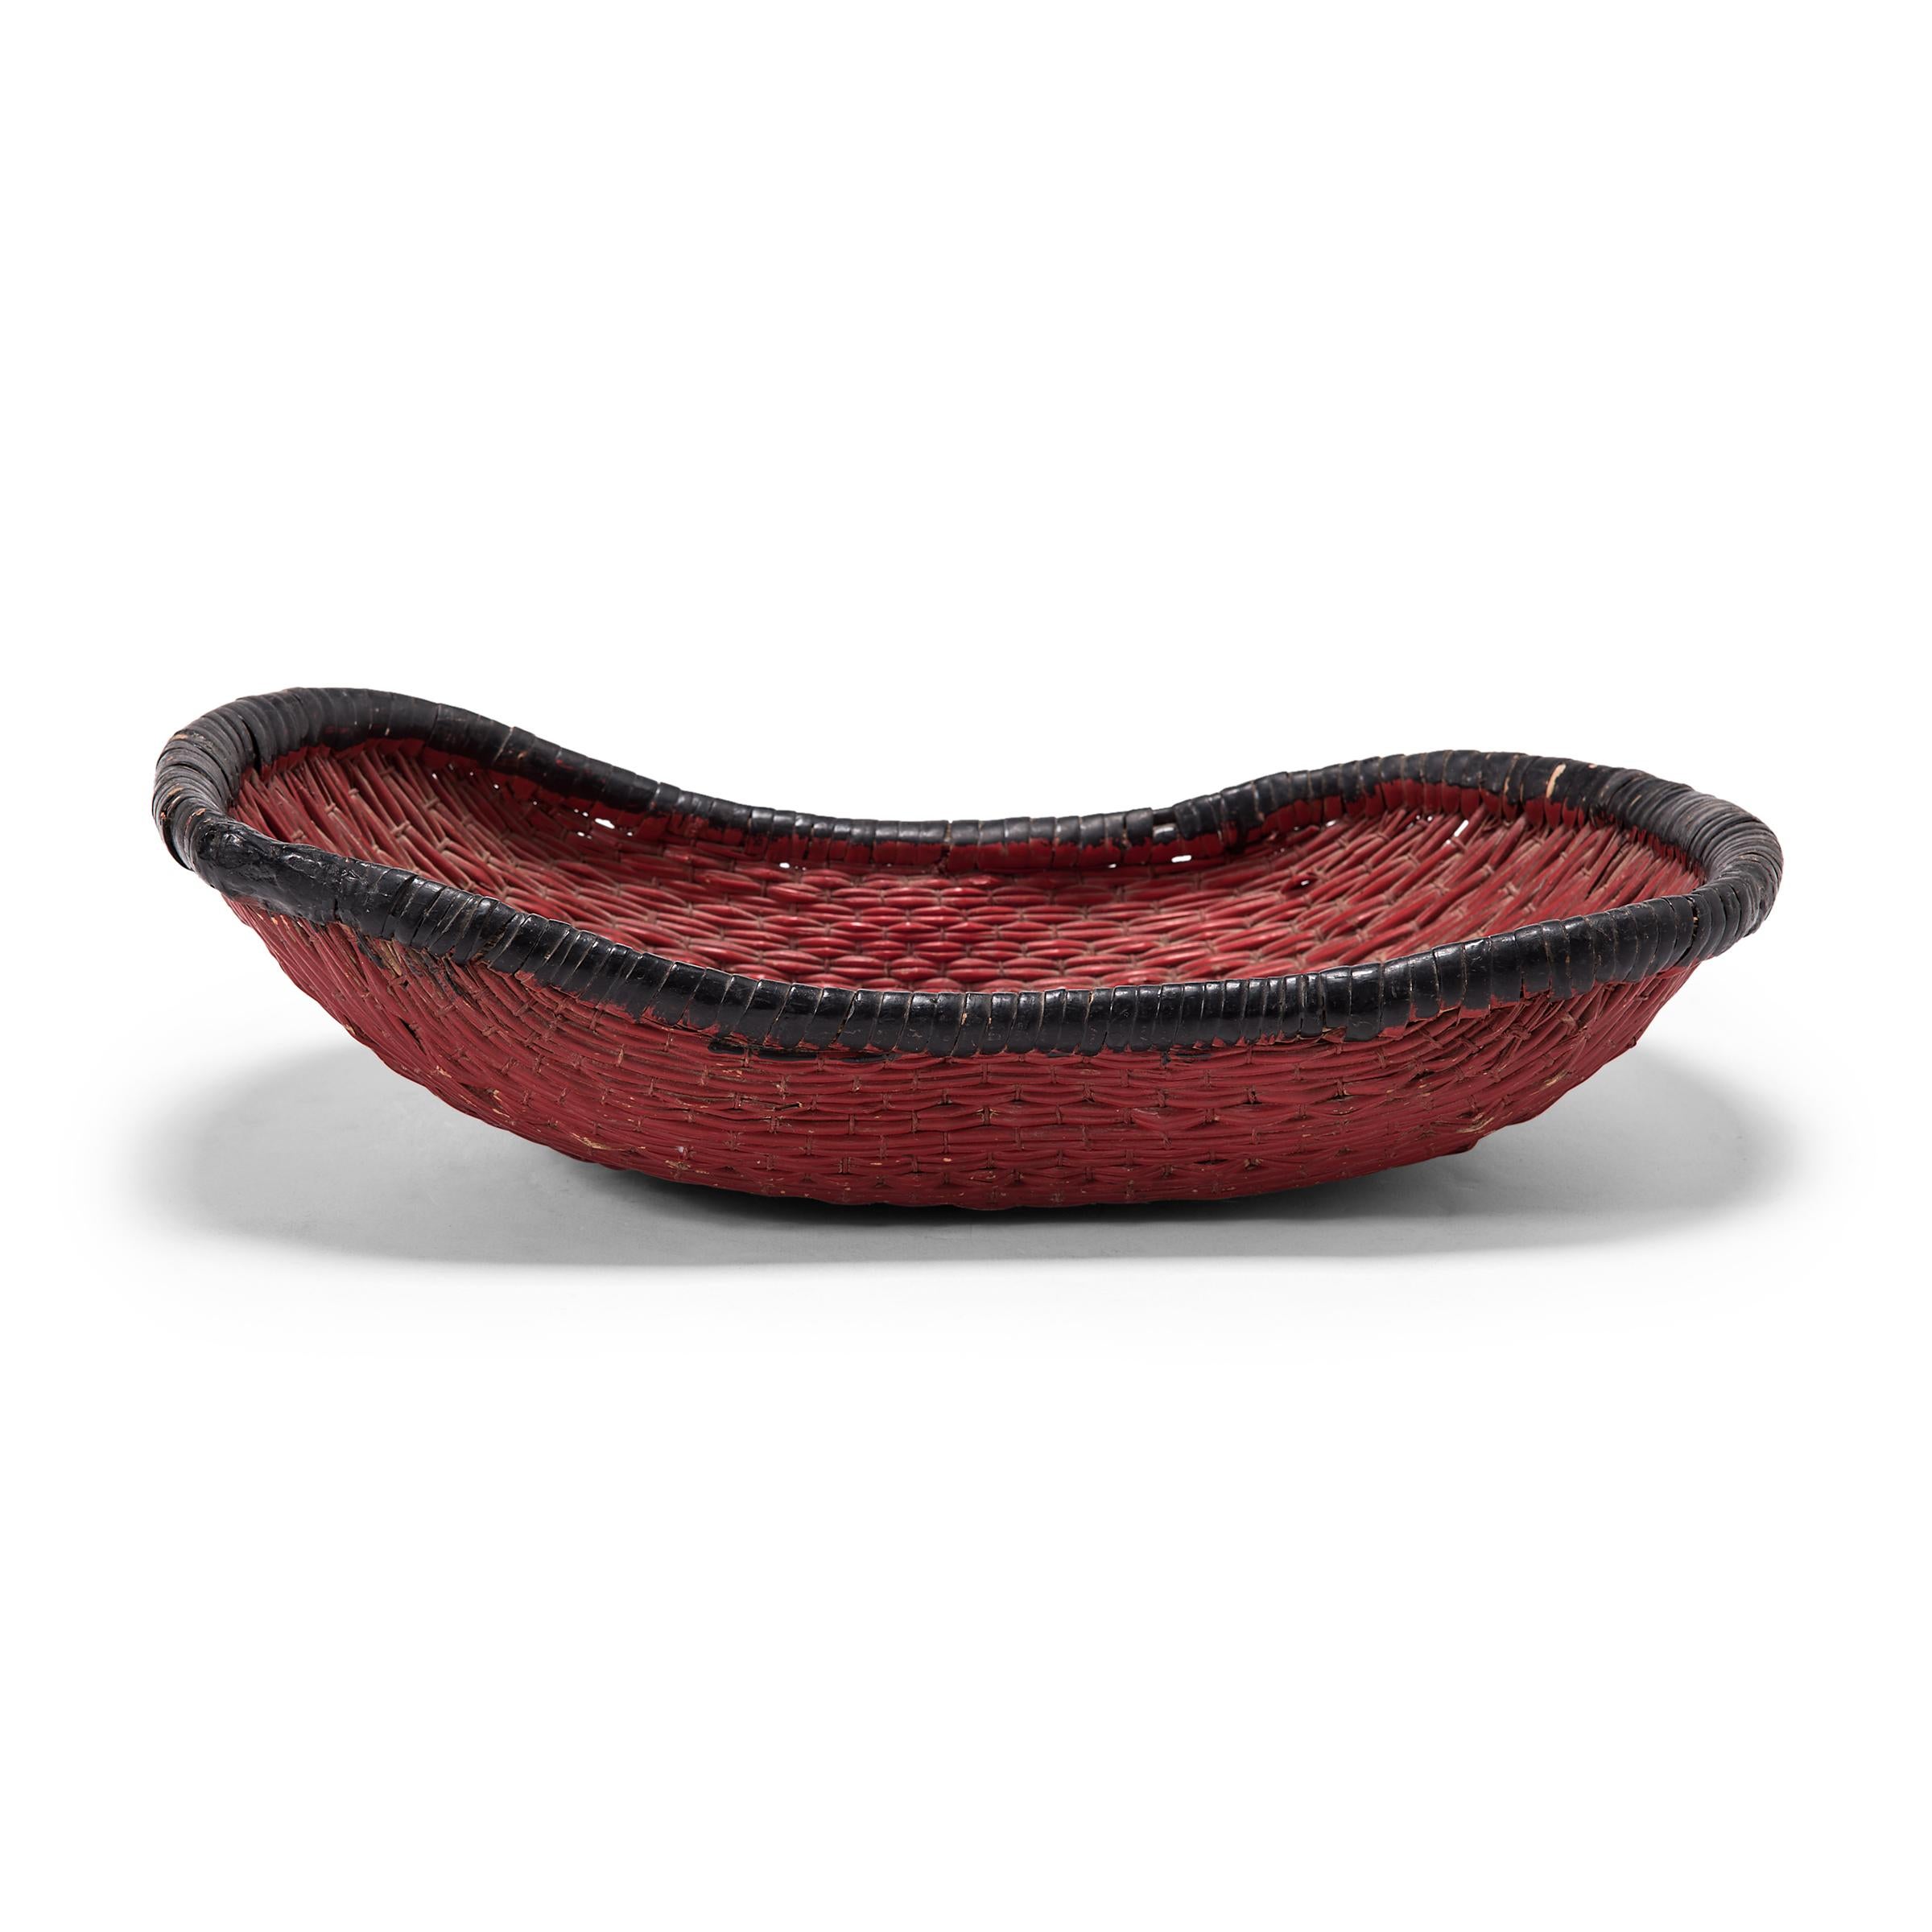 Hand-Woven Painted Chinese Mantou Basket, c. 1900